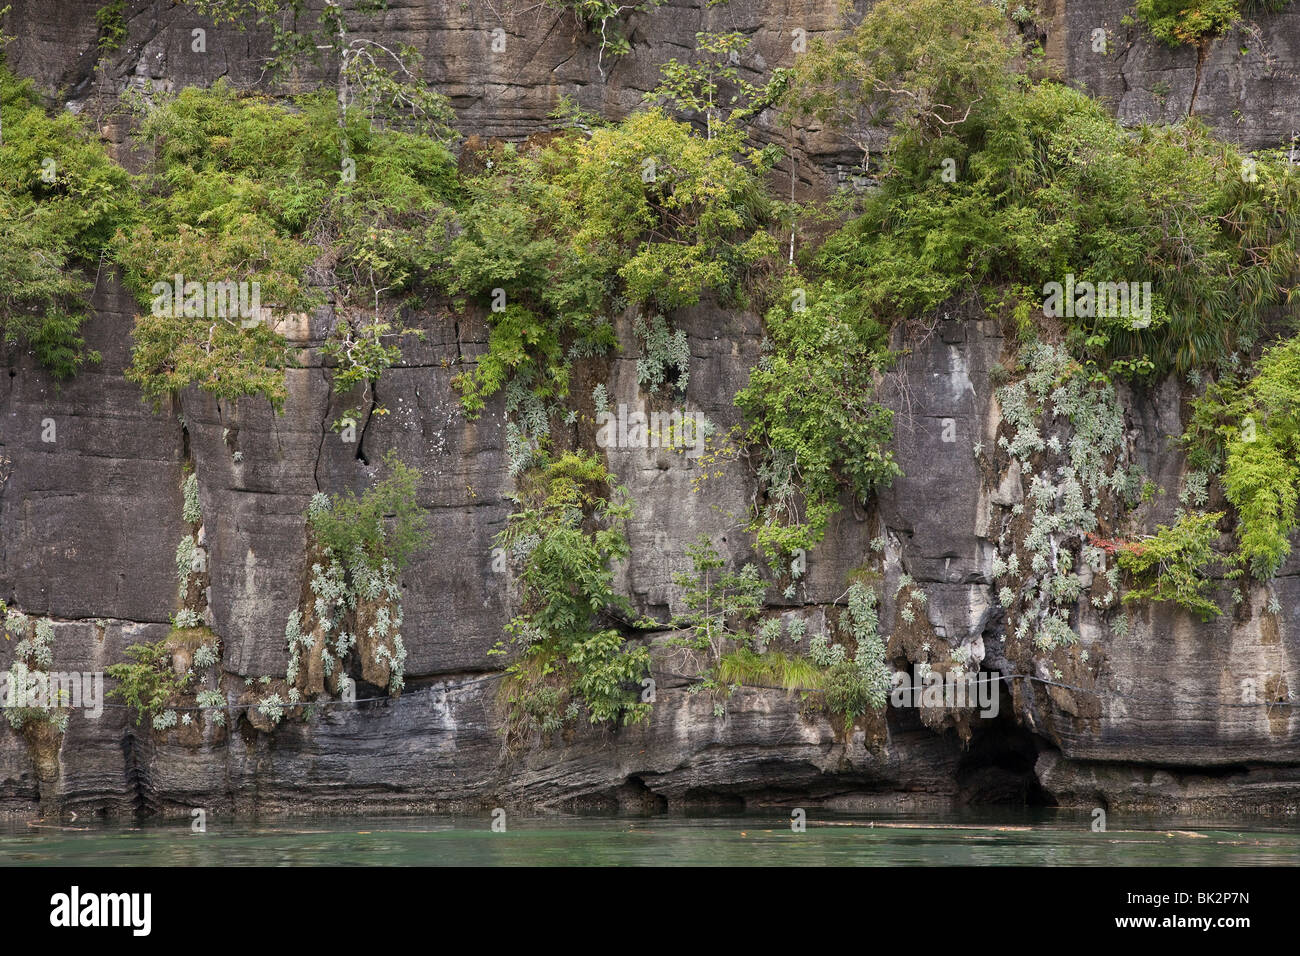 Pulau Langkawi Geopark, coastal limestone features with growing shrubbery. Stock Photo